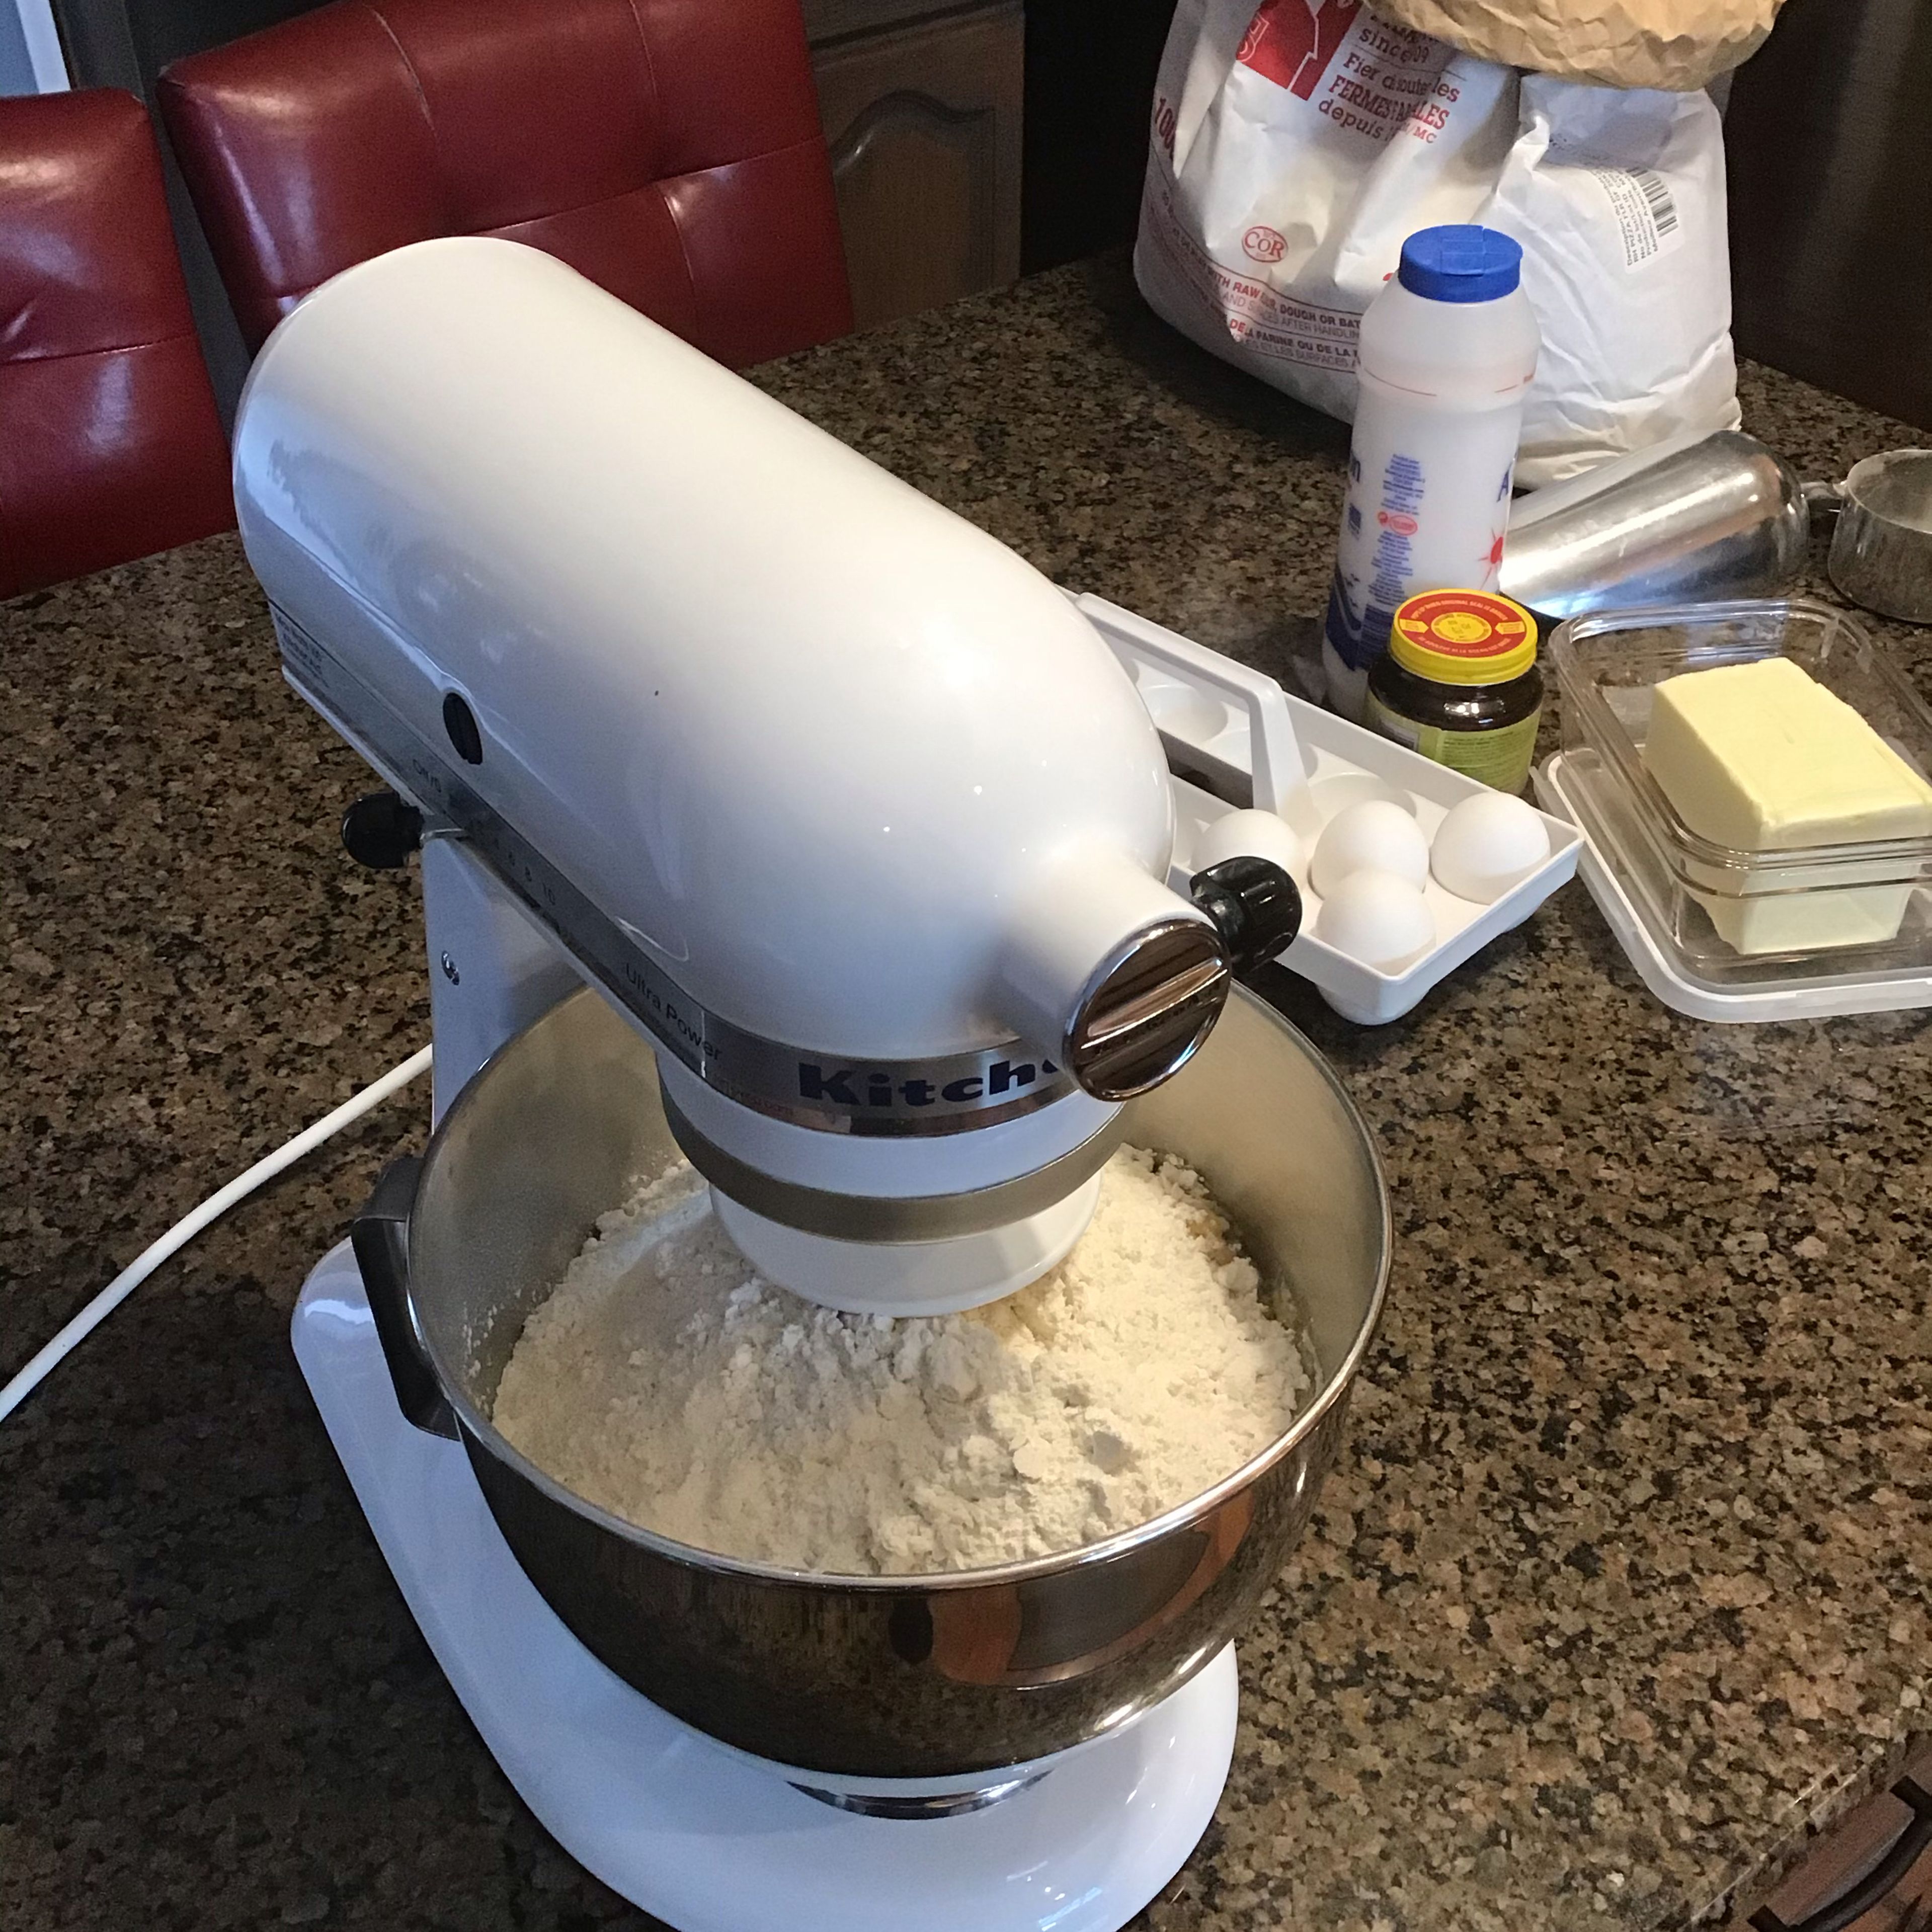 Dump flour mixture into stand mixer bowl on top of liquid ingredients. Attach dough hook, lower and lock head in place and turn mixer on at lowest speed.